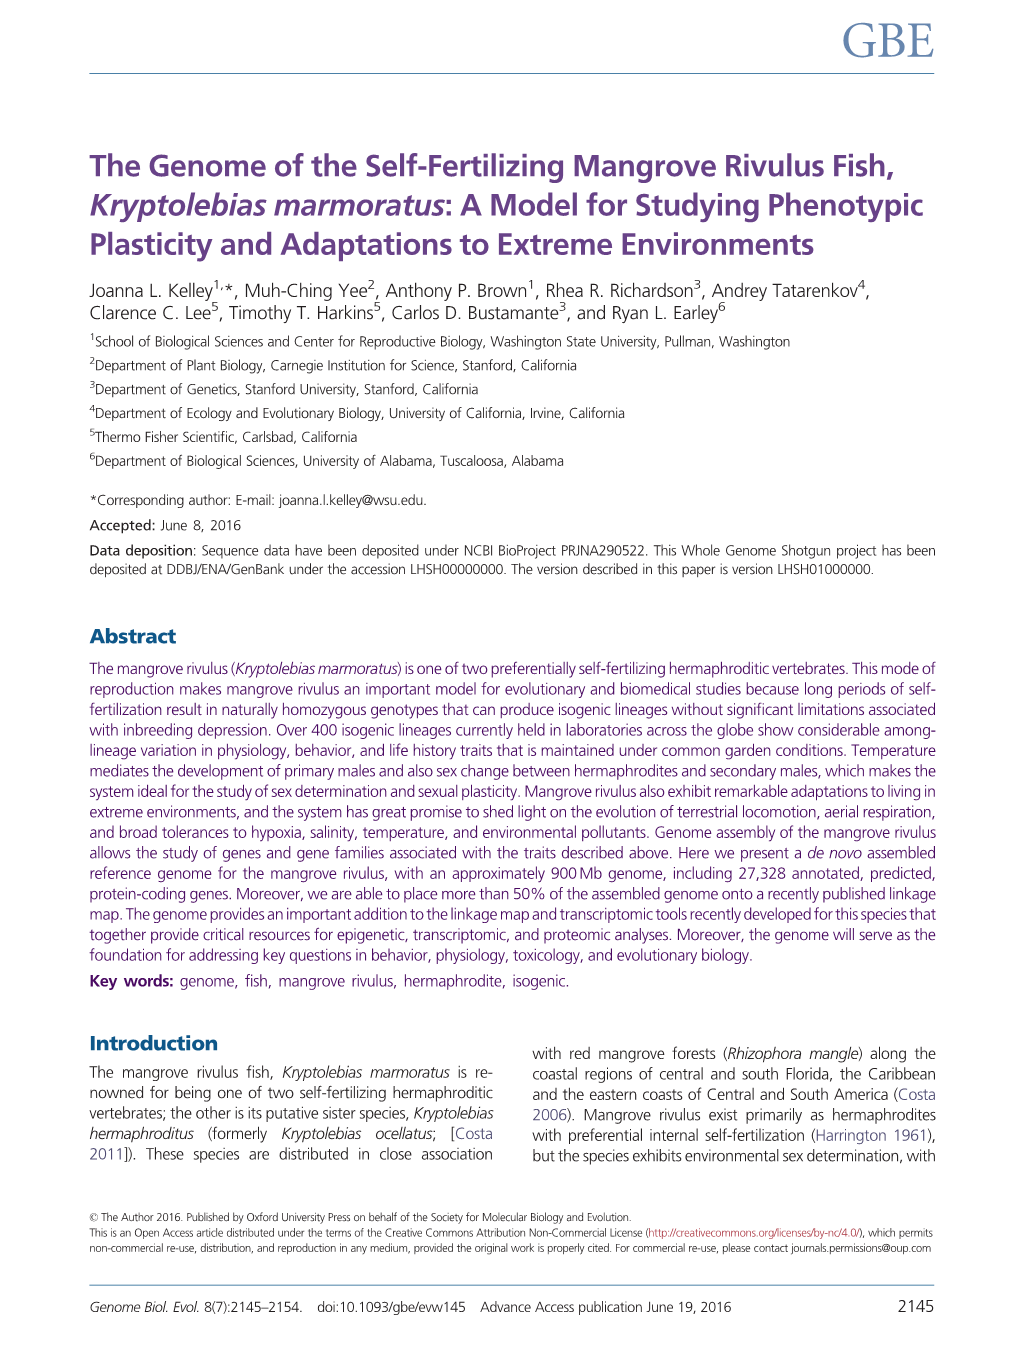 The Genome of the Self-Fertilizing Mangrove Rivulus Fish, Kryptolebias Marmoratus: a Model for Studying Phenotypic Plasticity and Adaptations to Extreme Environments